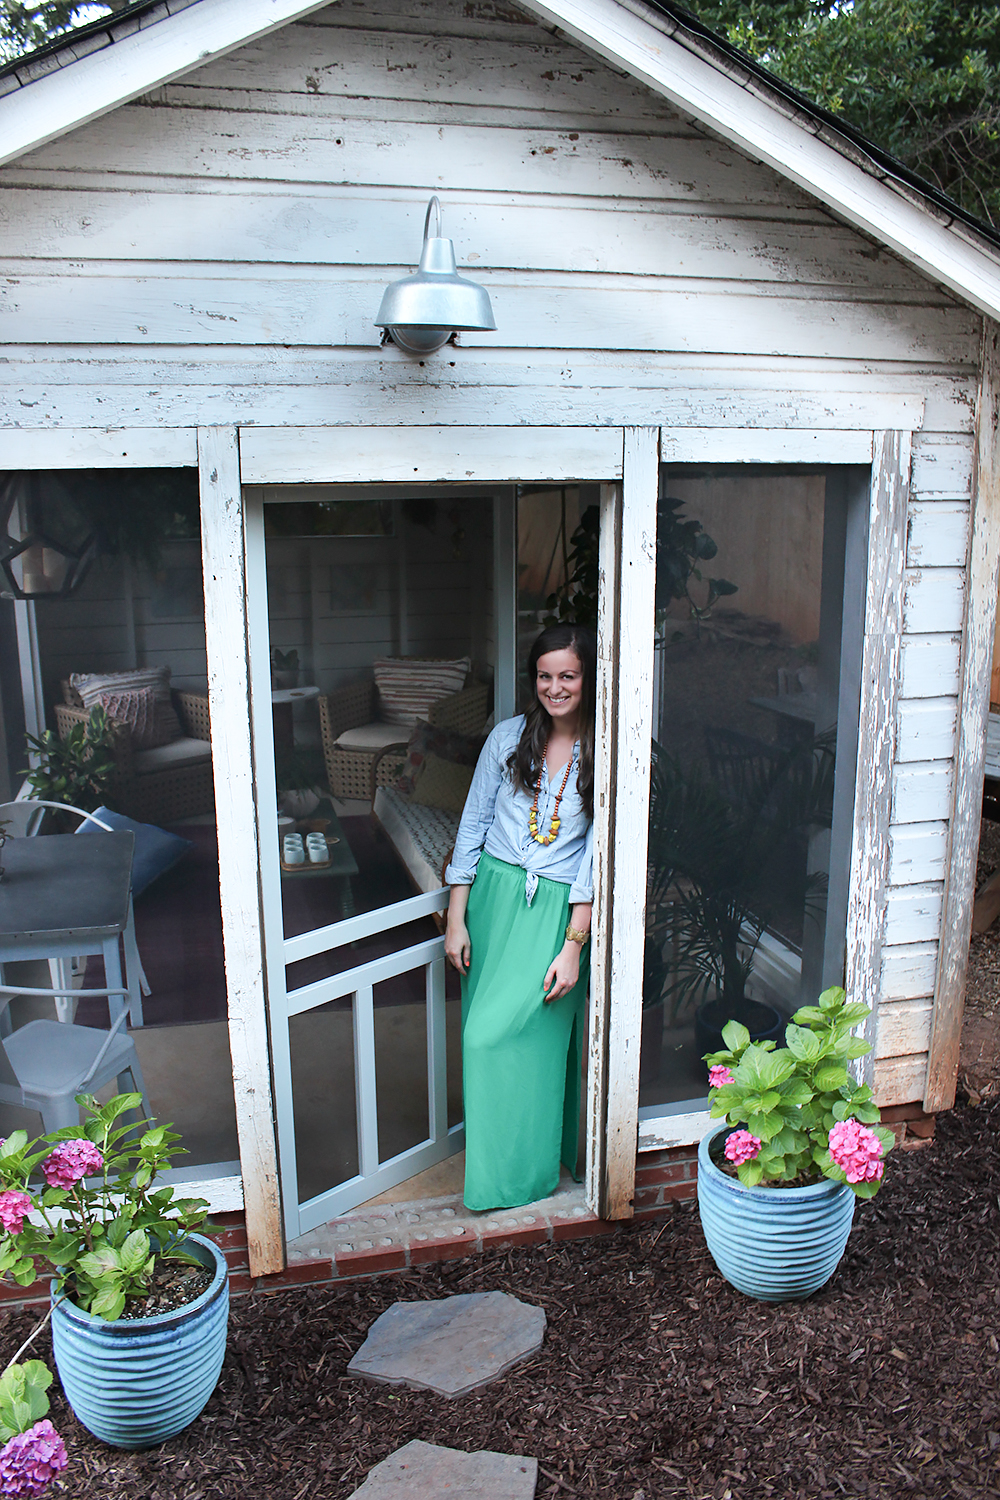 MY SHE SHED WITH SCREEN PORCH PANELS